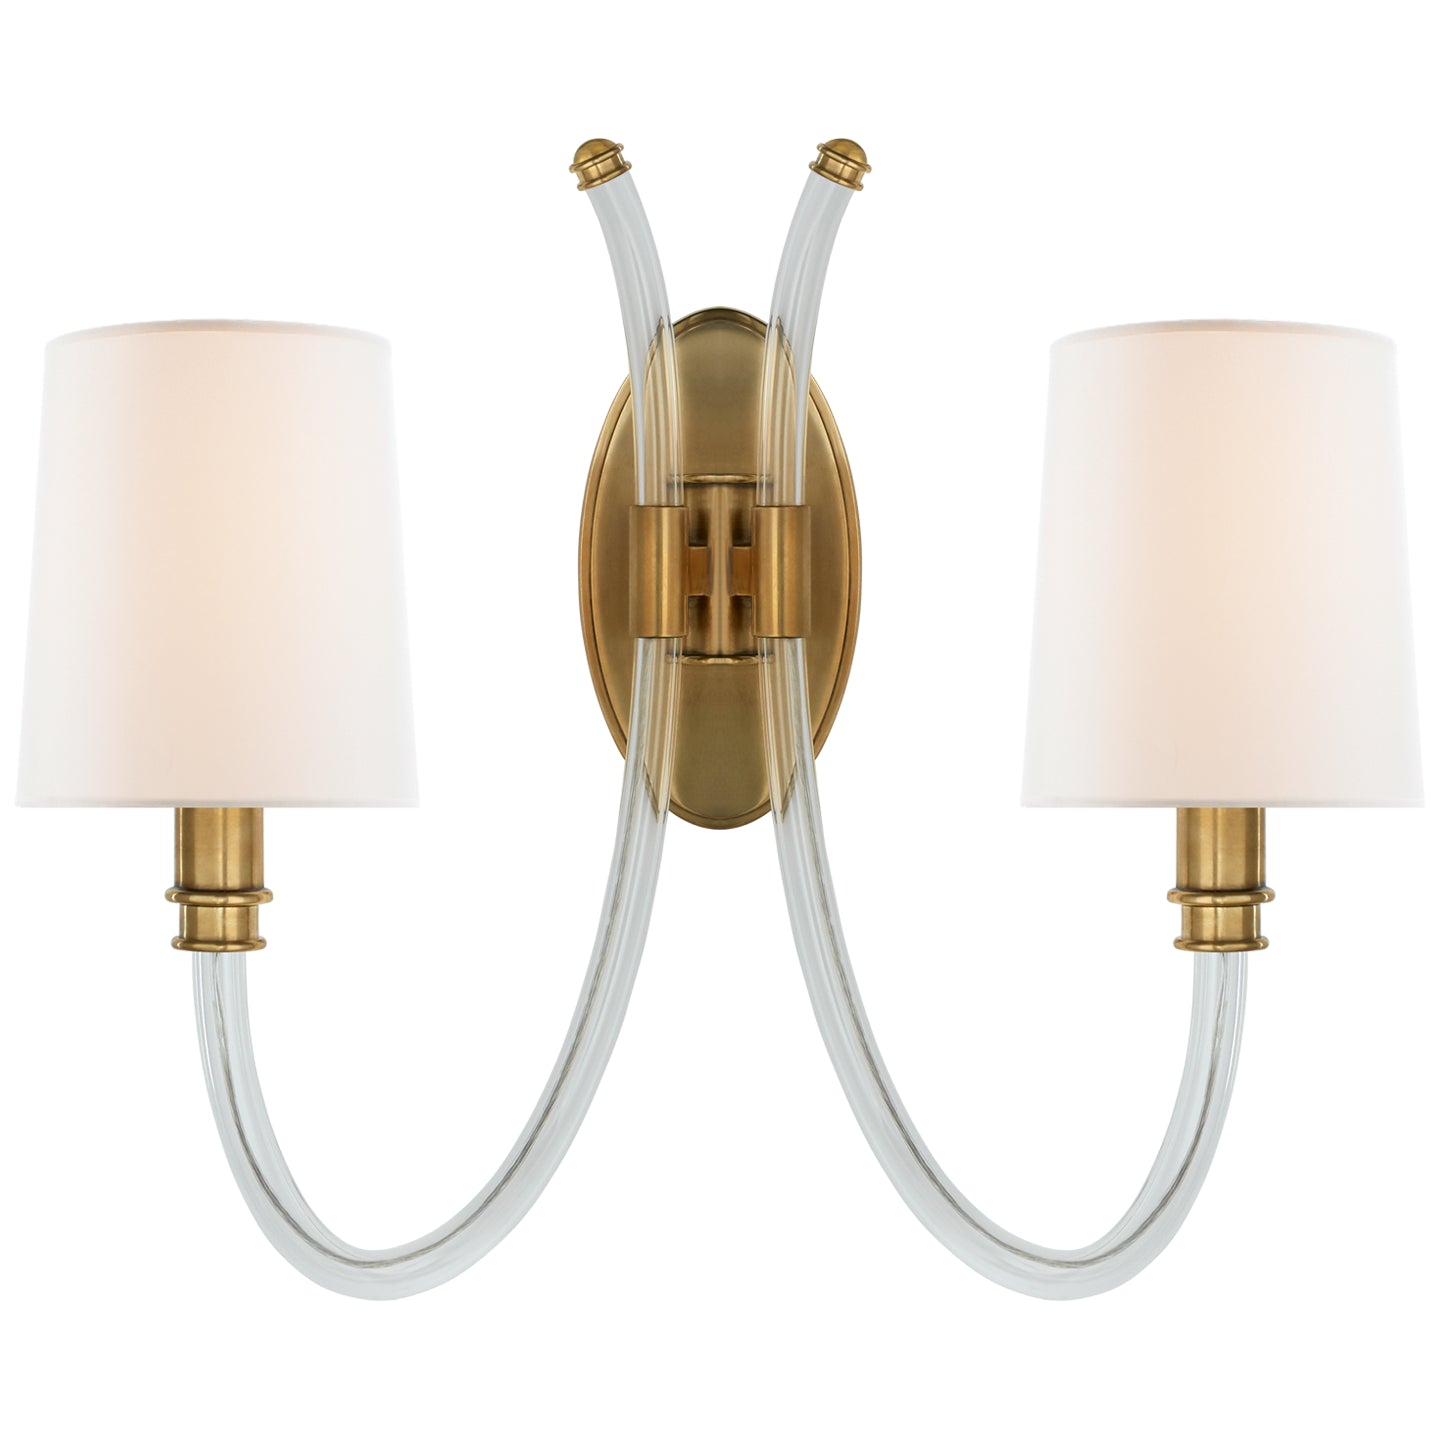 Visual Comfort Signature - JN 2030CG/AB-L - Two Light Wall Sconce - Clarice - Crystal with Antique Brass